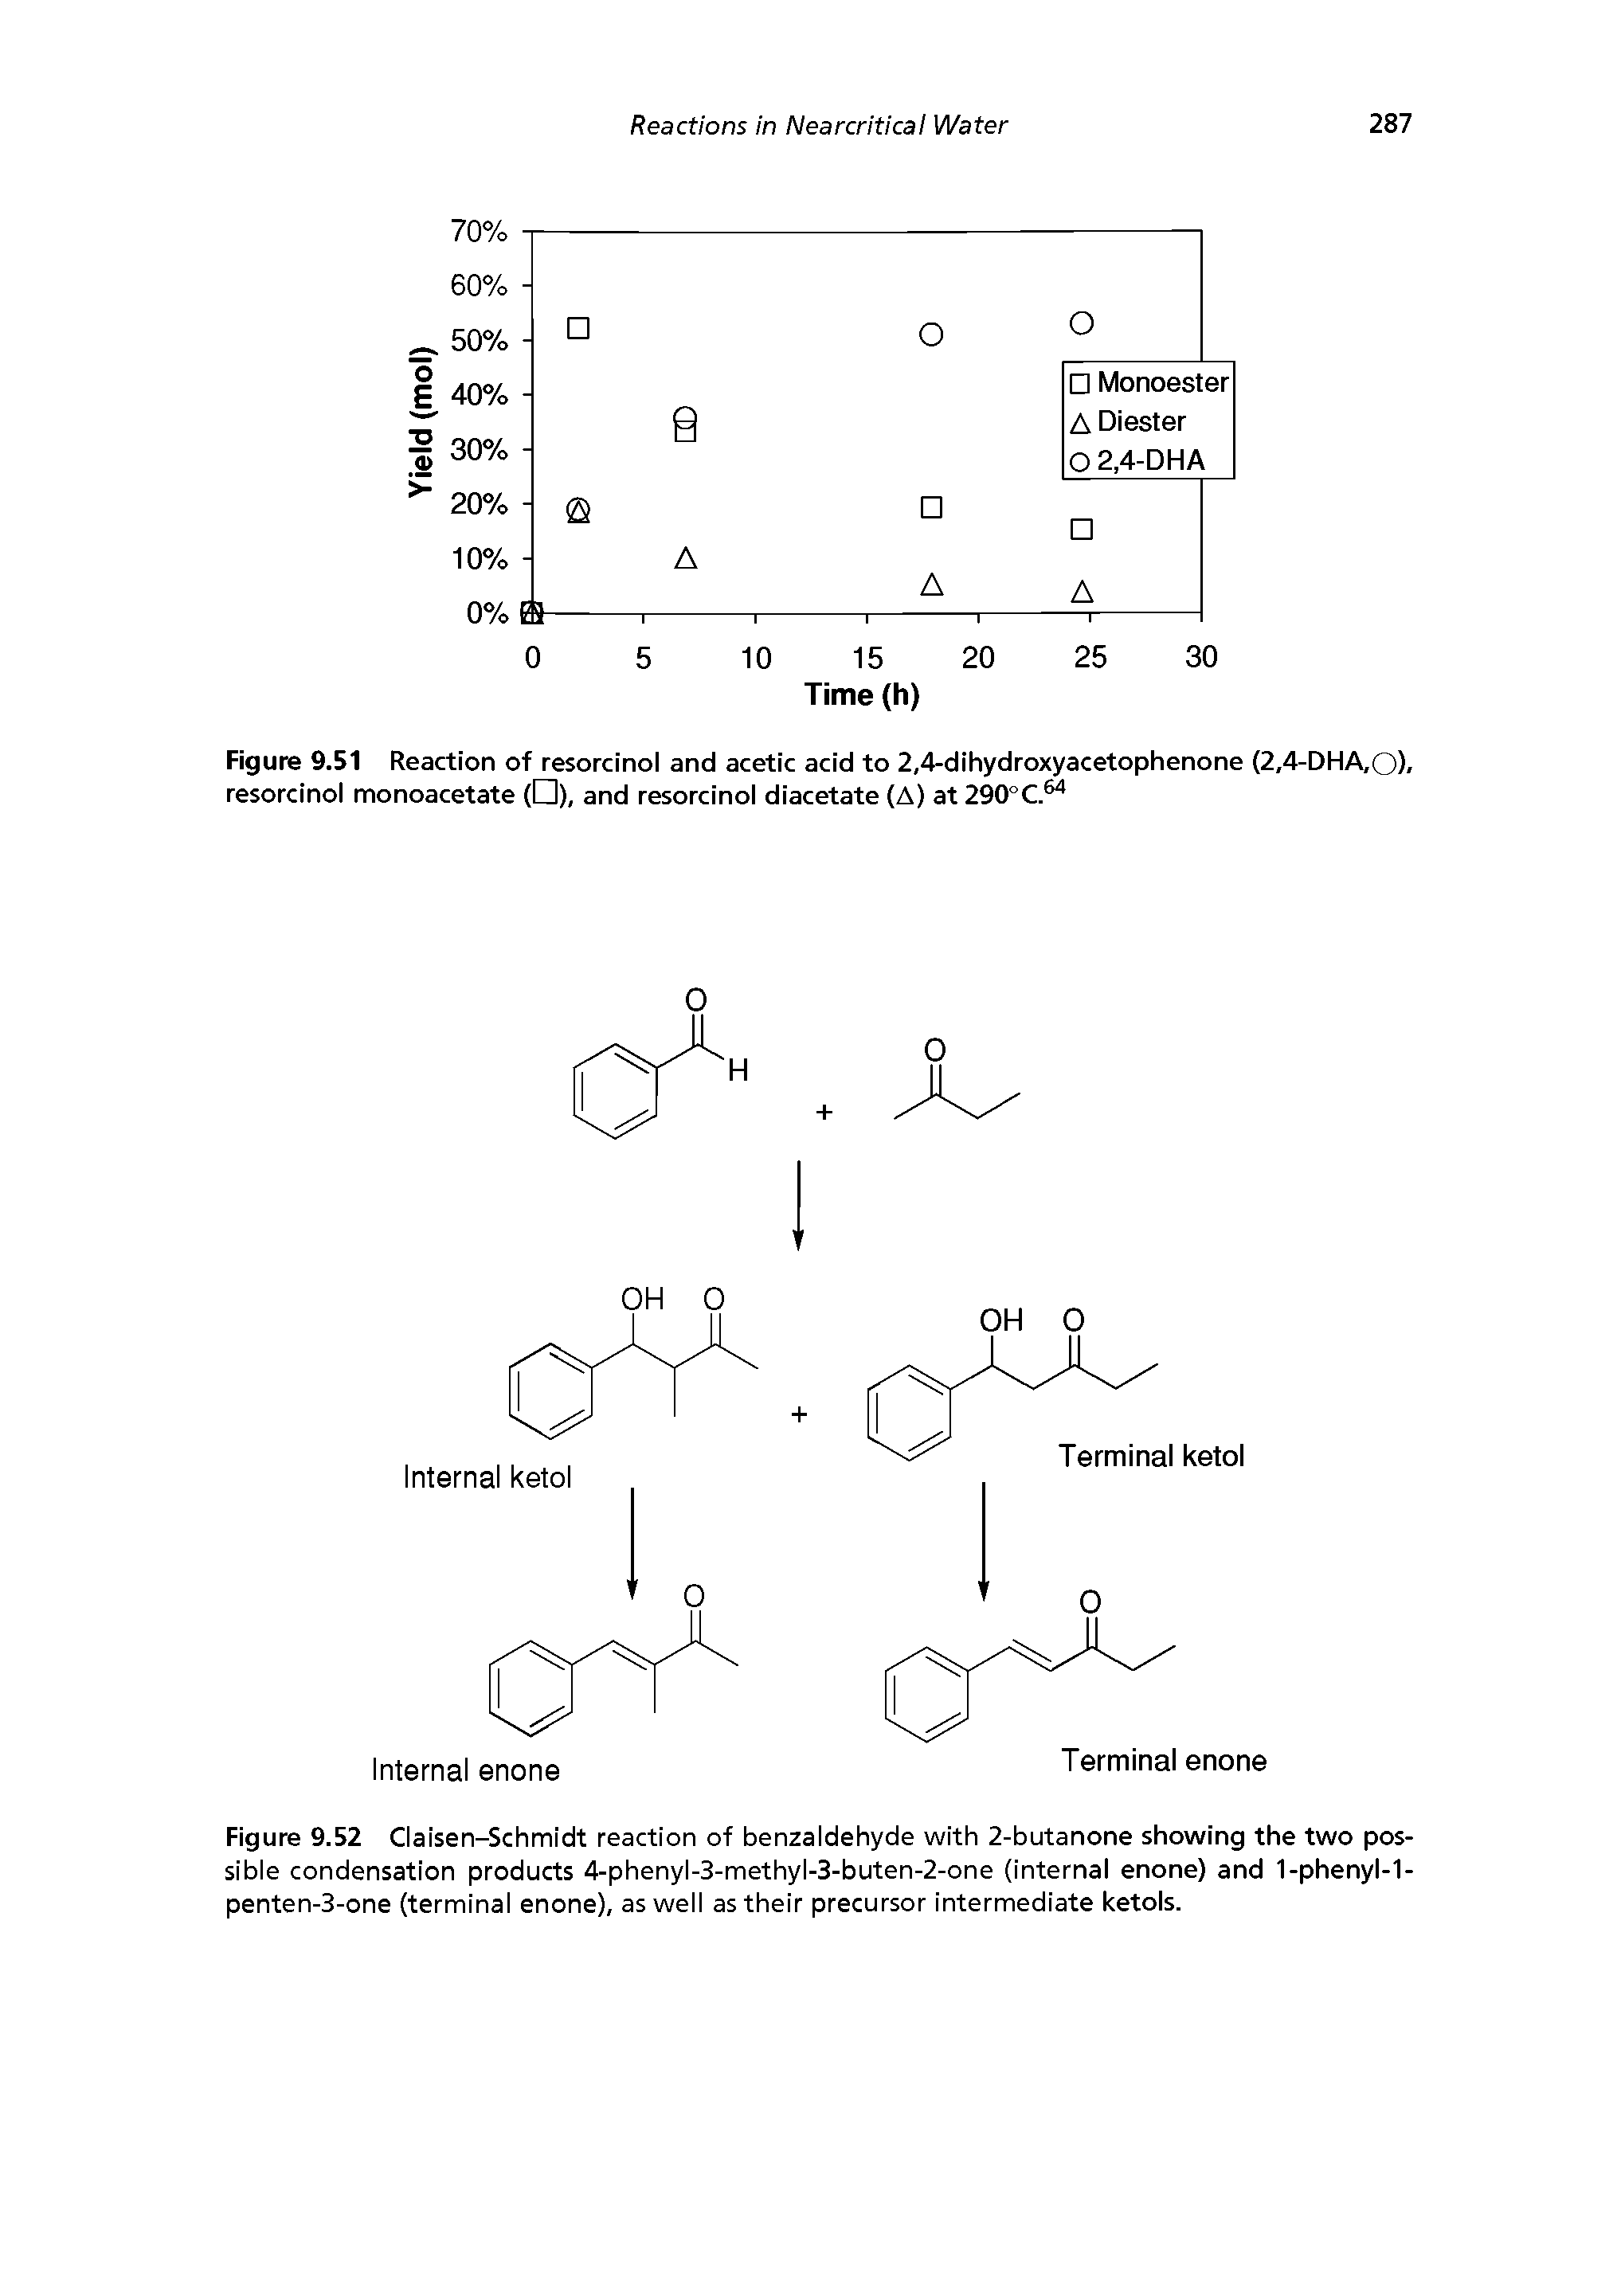 Figure 9.52 Claisen-Schmidt reaction of benzaldehyde with 2-butanone showing the two possible condensation products 4-phenyl-3-methyl-3-buten-2-one (internal enone) and 1-phenyl-1-penten-3-one (terminal enone), as well as their precursor intermediate ketols.